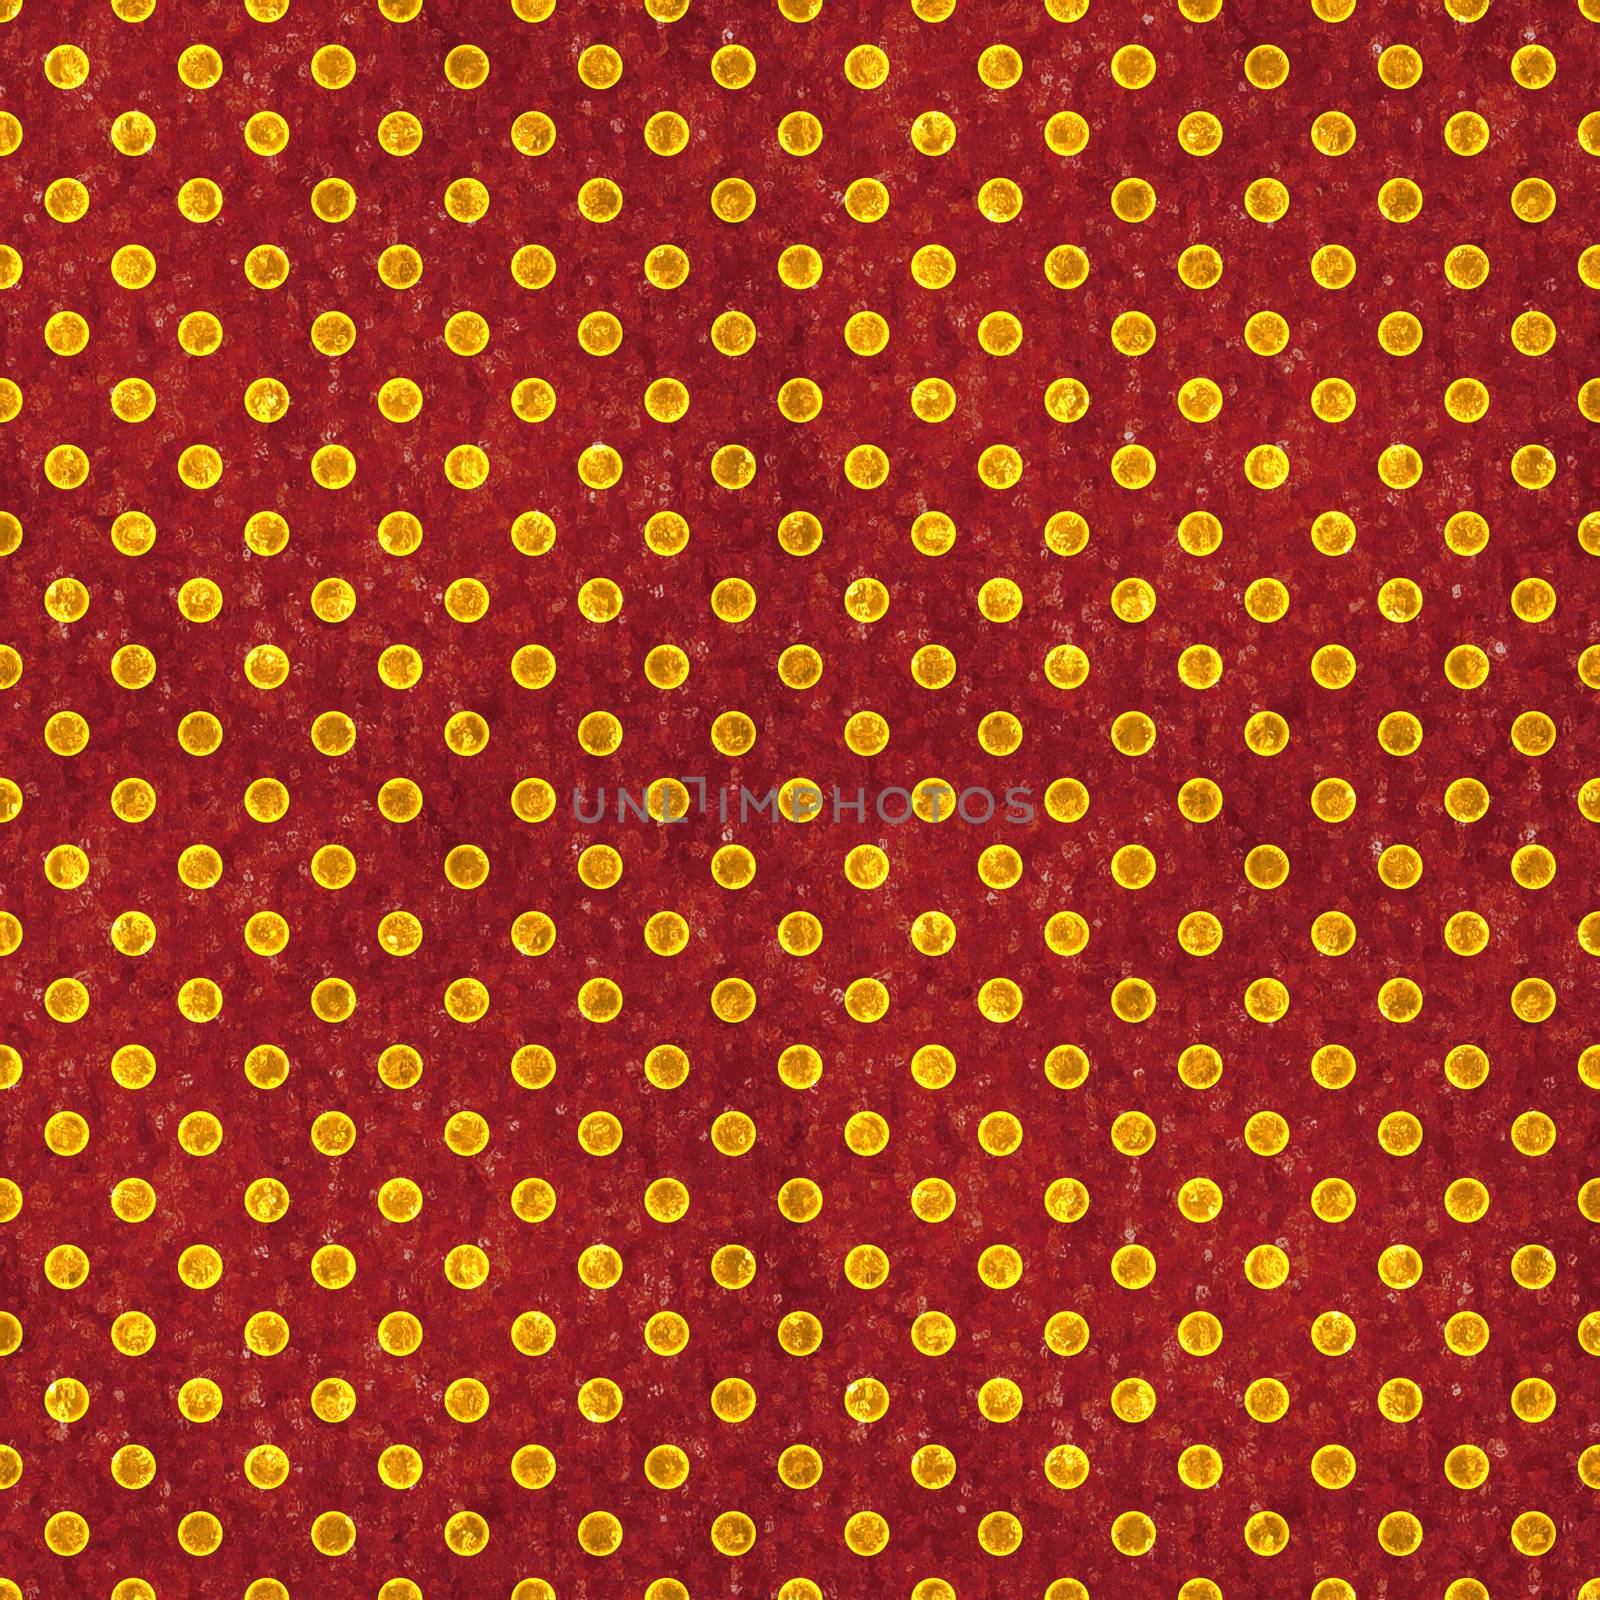 Glowing gold polka dots on deep red textured background. Seamless